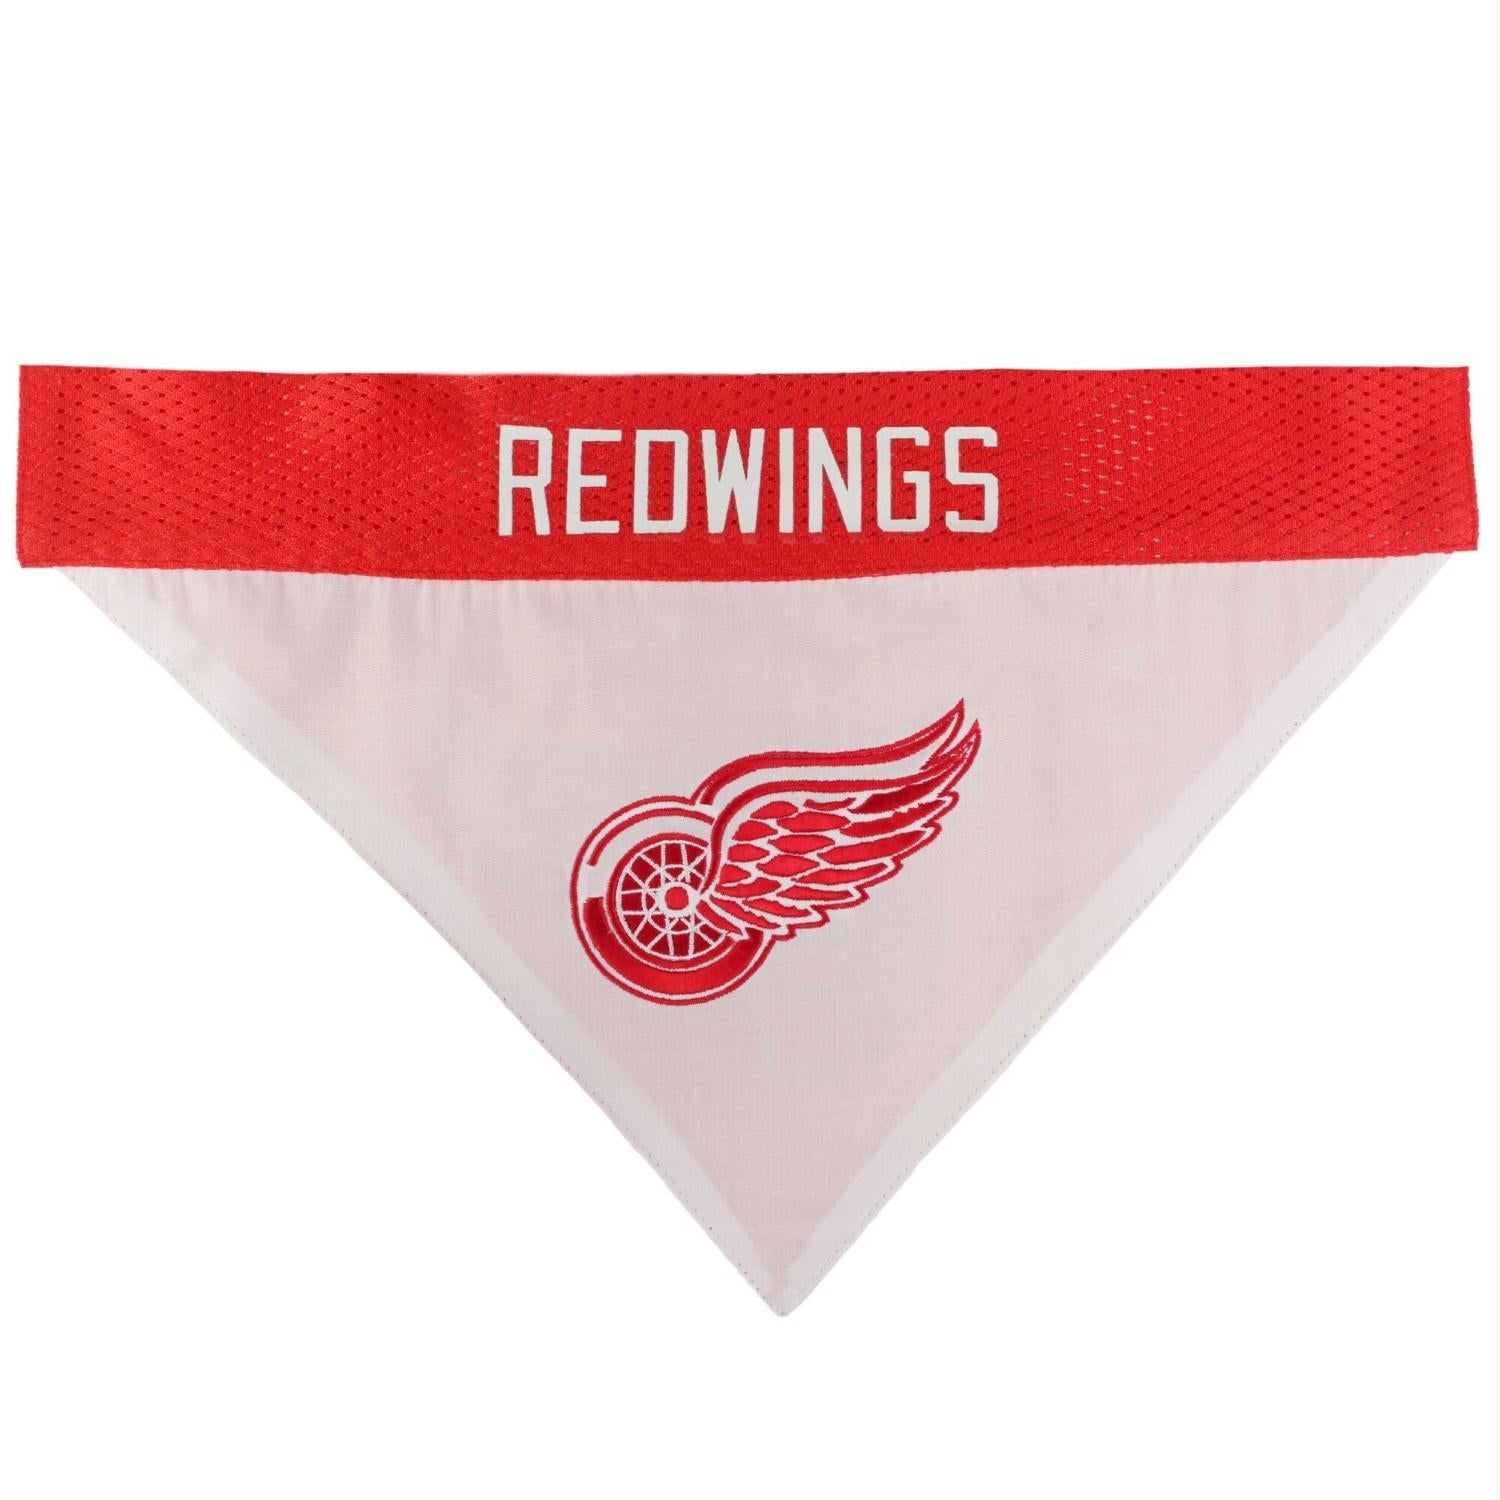 Detroit Red Wings Pet Gear, Red Wings Collars, Chew Toys, Pet